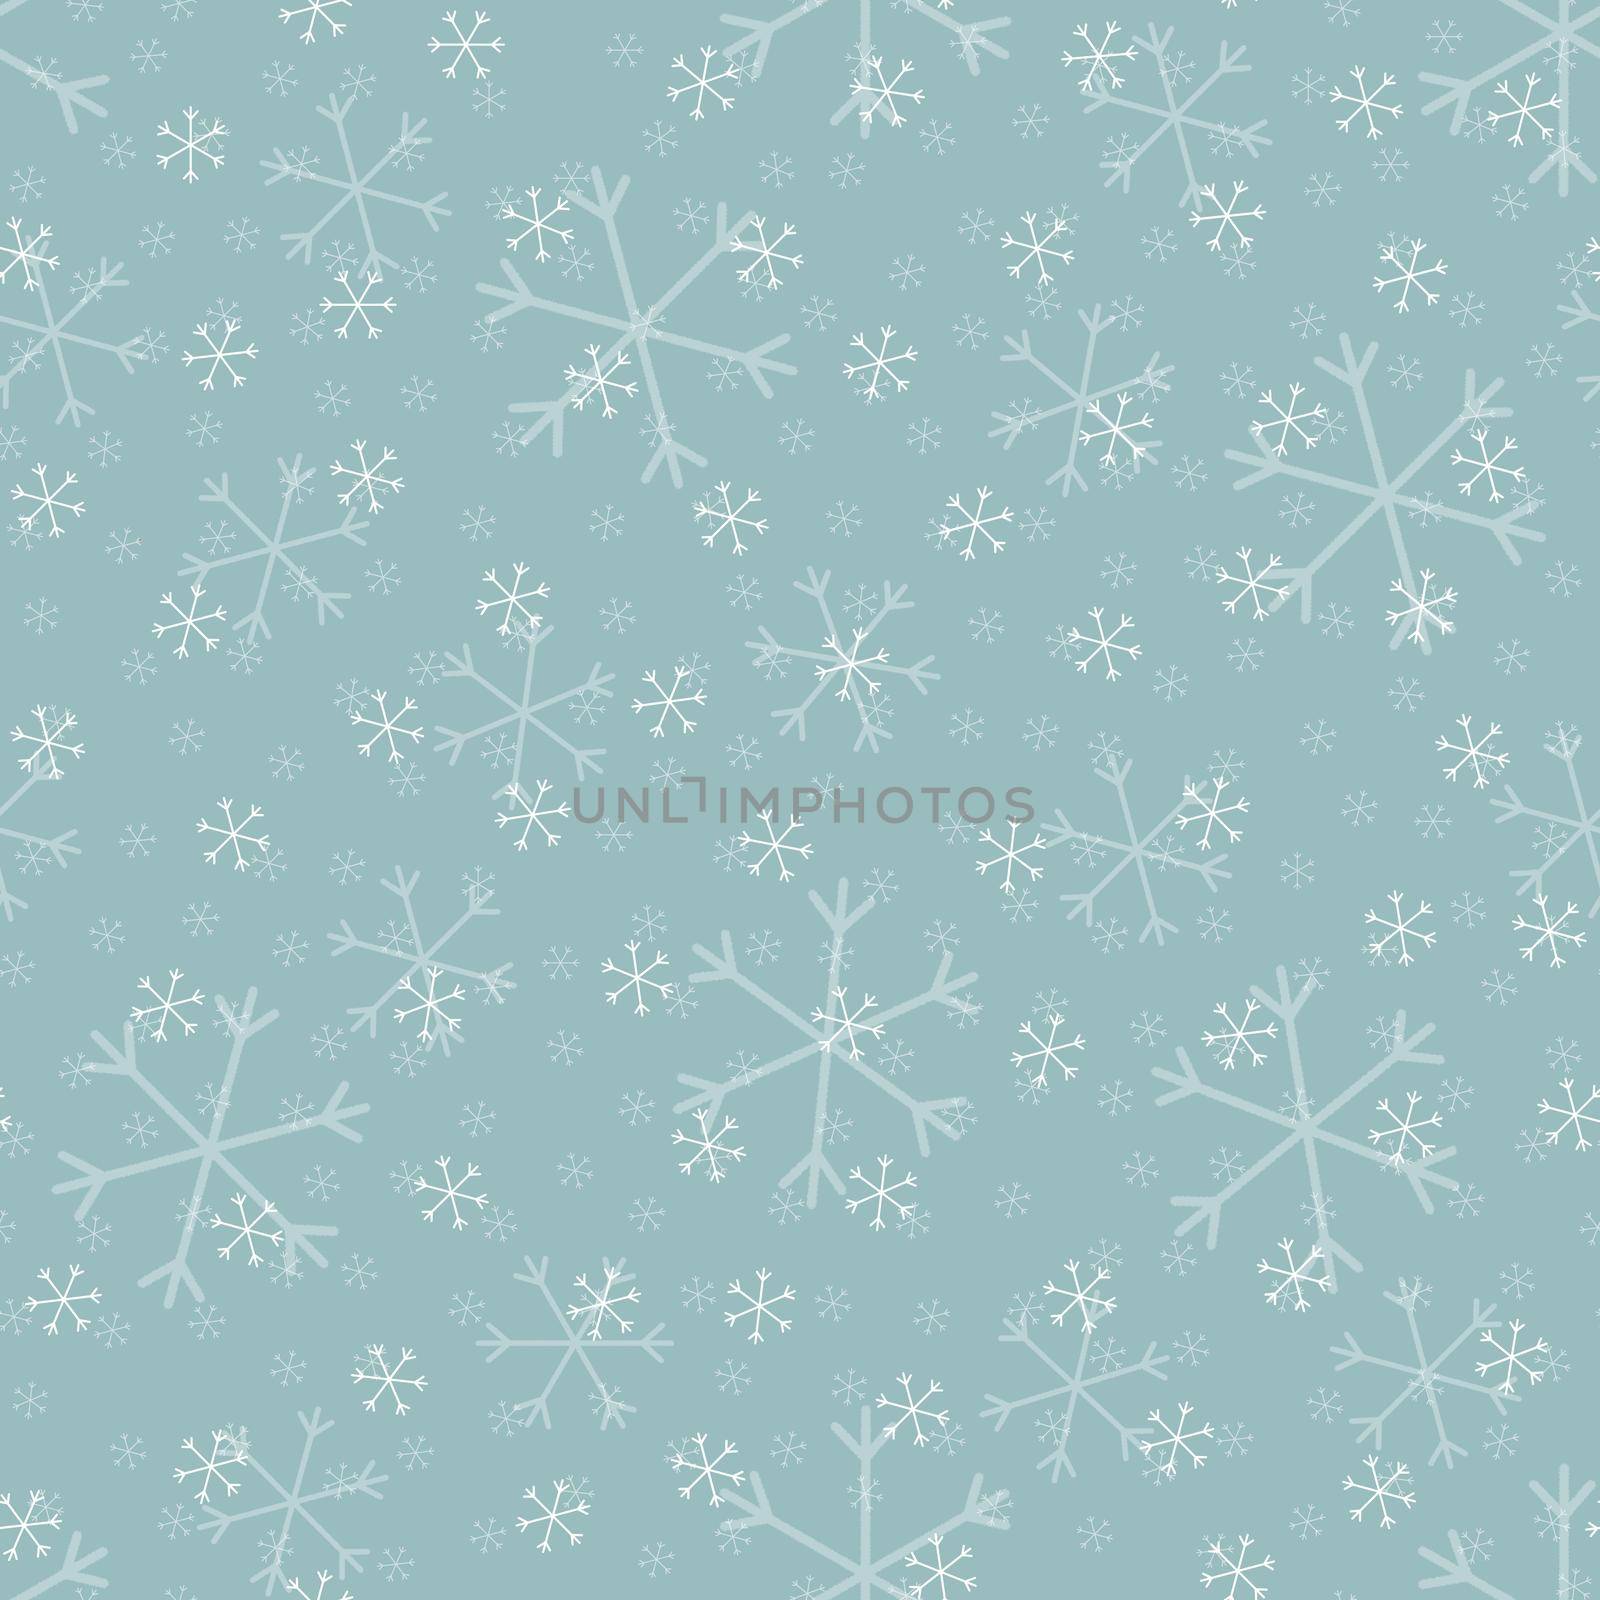 Seamless Christmas pattern doodle with hand random drawn snowflakes.Wrapping paper for presents, funny textile fabric print, design,decor, food wrap, backgrounds. new year.Raster copy.Sky gray, white by Angelsmoon